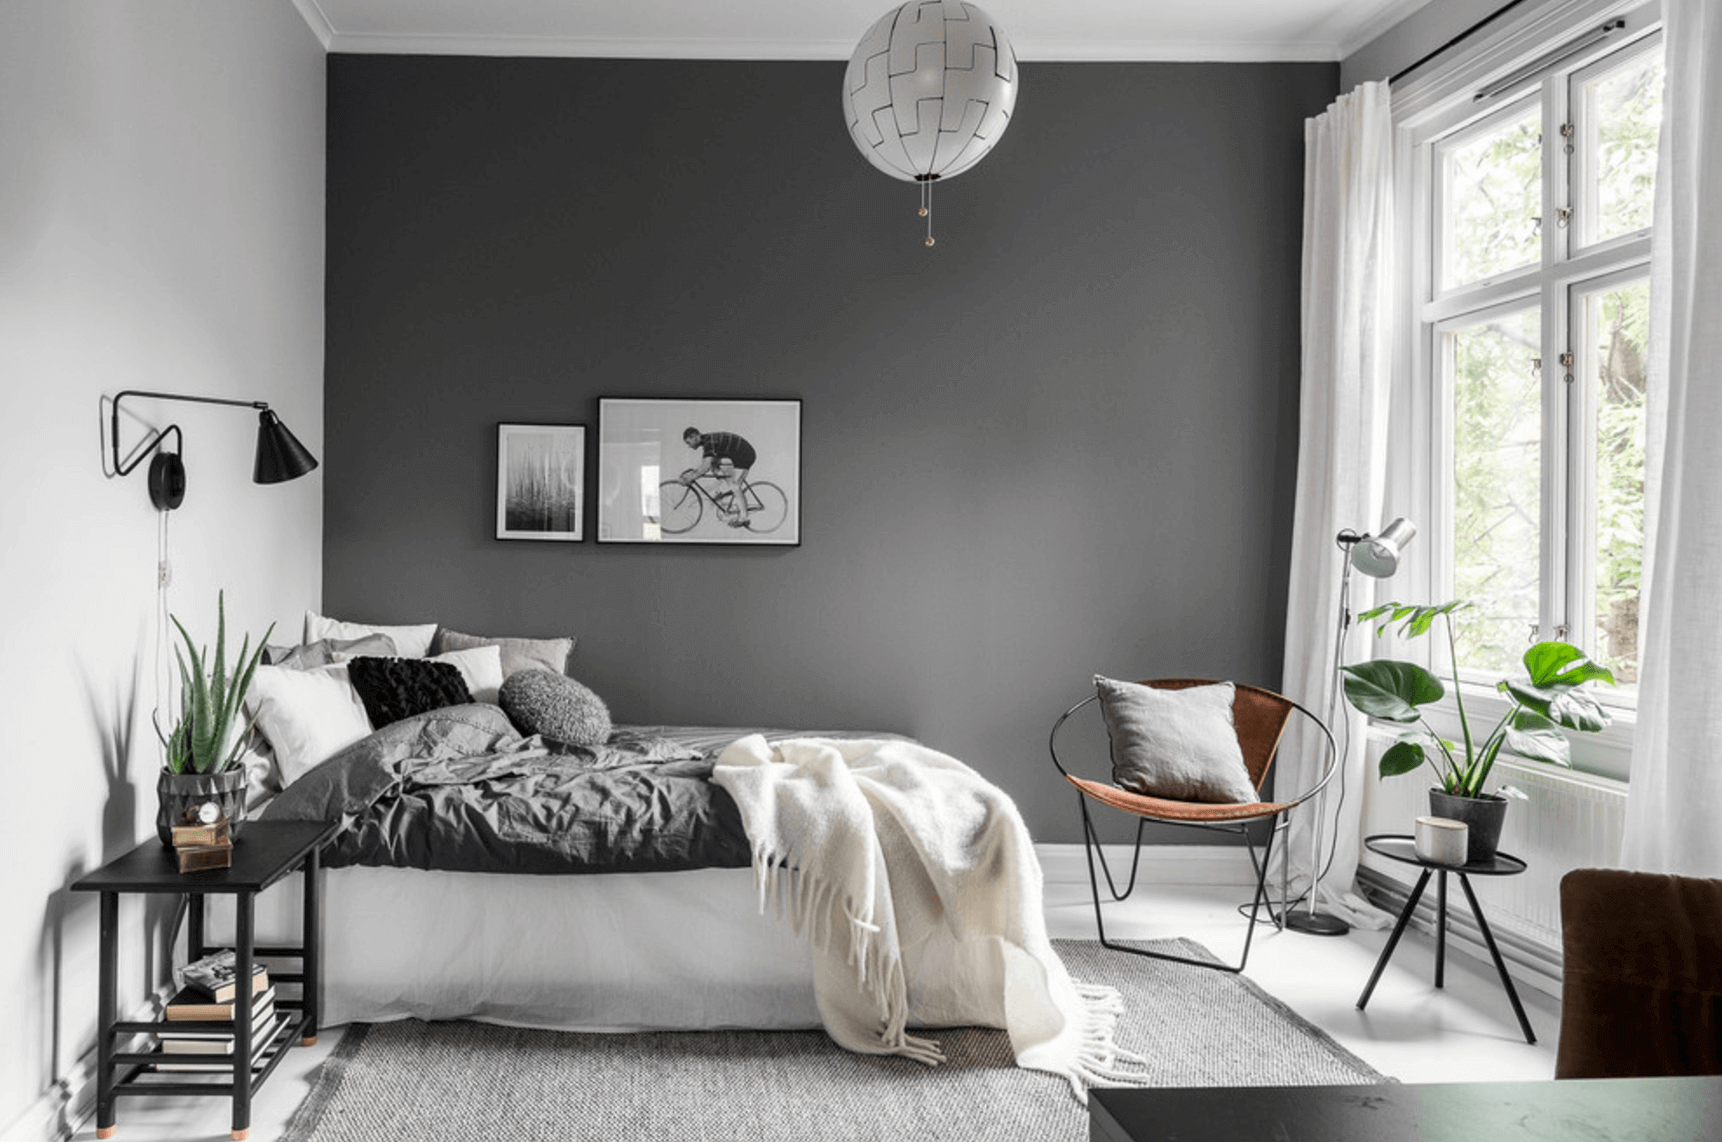 Minimalist Décor is the Perfect Statement in this Grey Bedroom Ideas